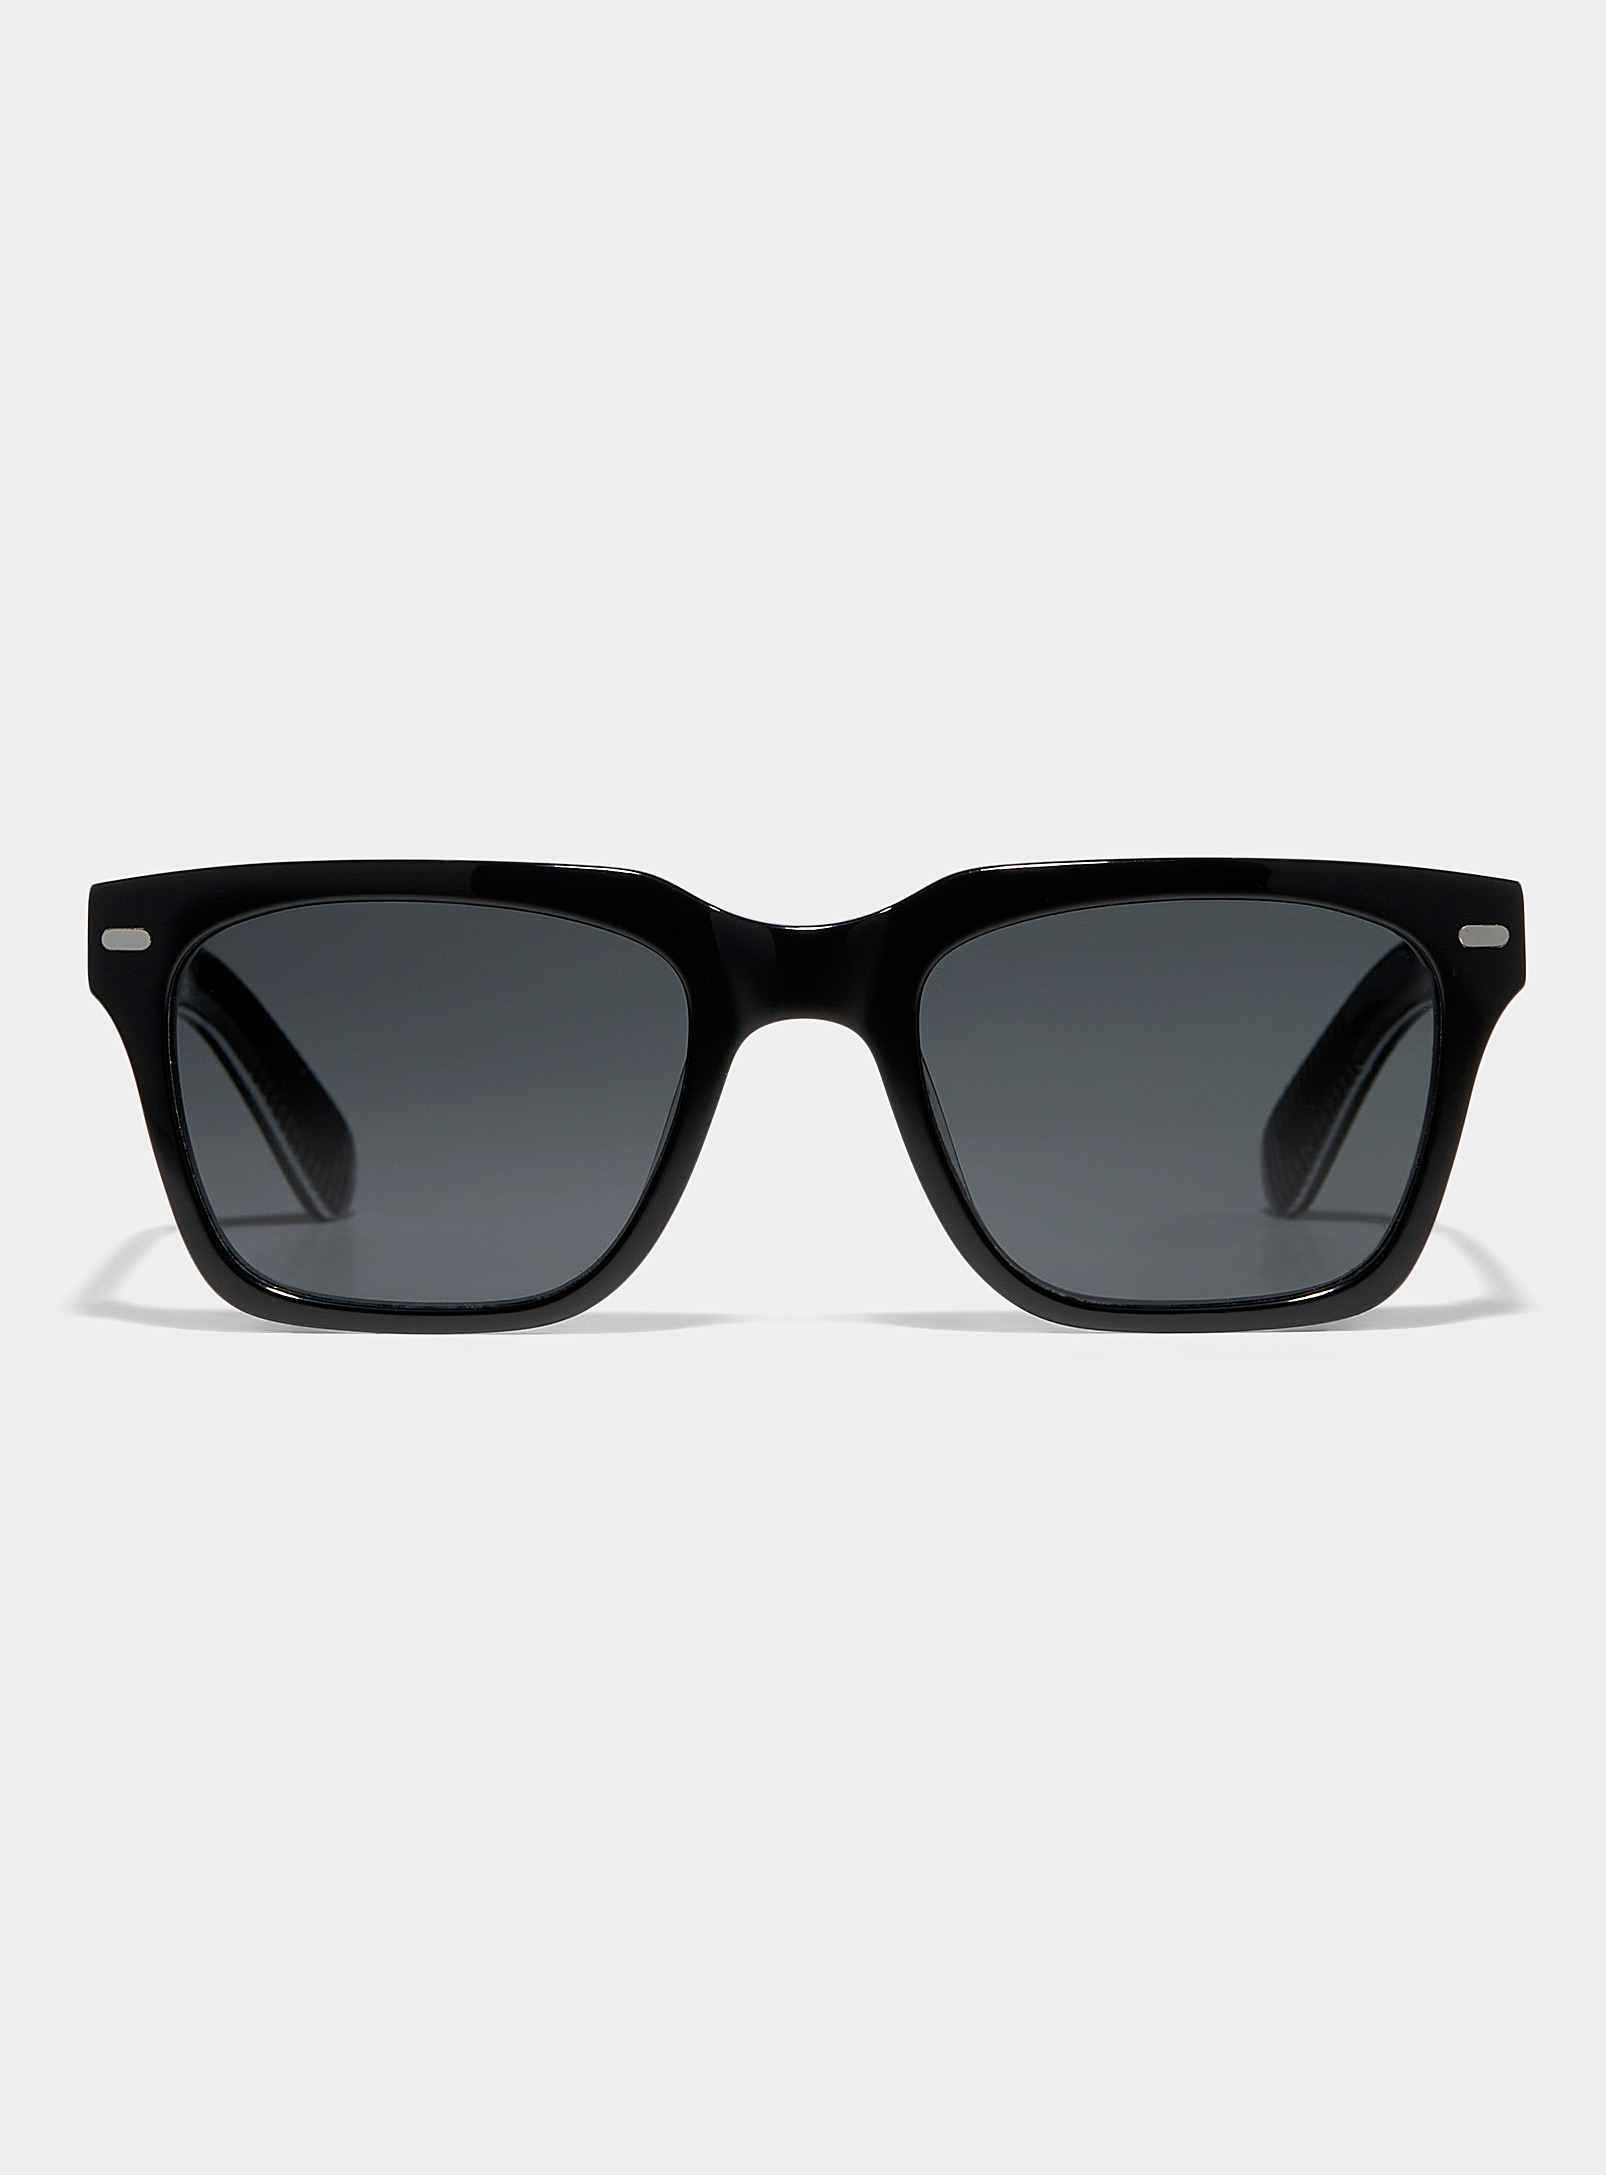 Spitfire Cut Forty Square Sunglasses In Black